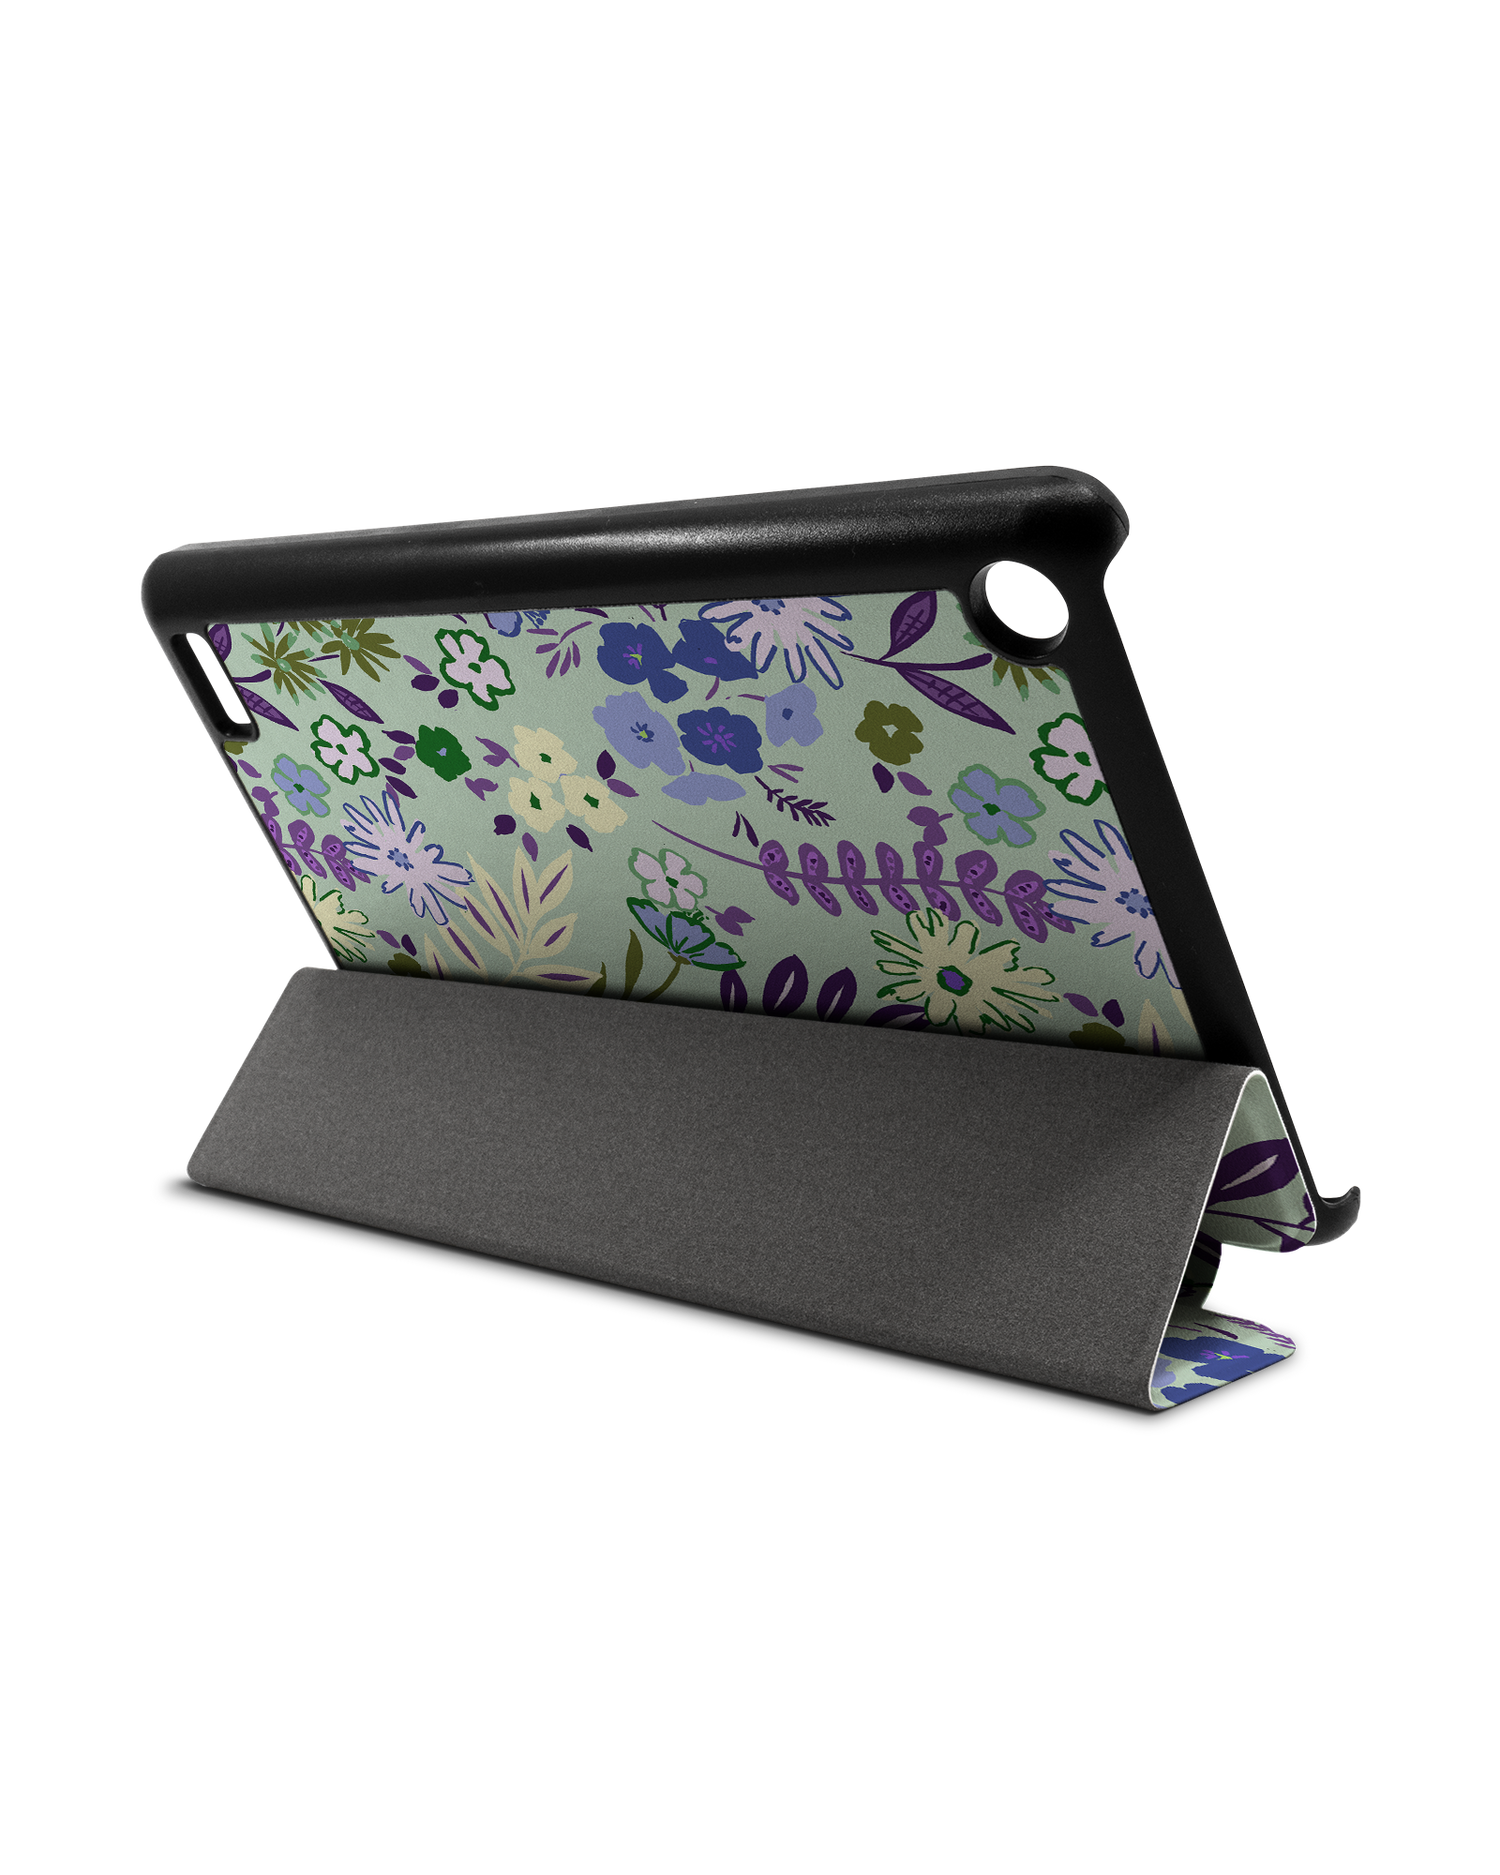 Pretty Purple Flowers Tablet Smart Case for Amazon Fire 7: Used as Stand